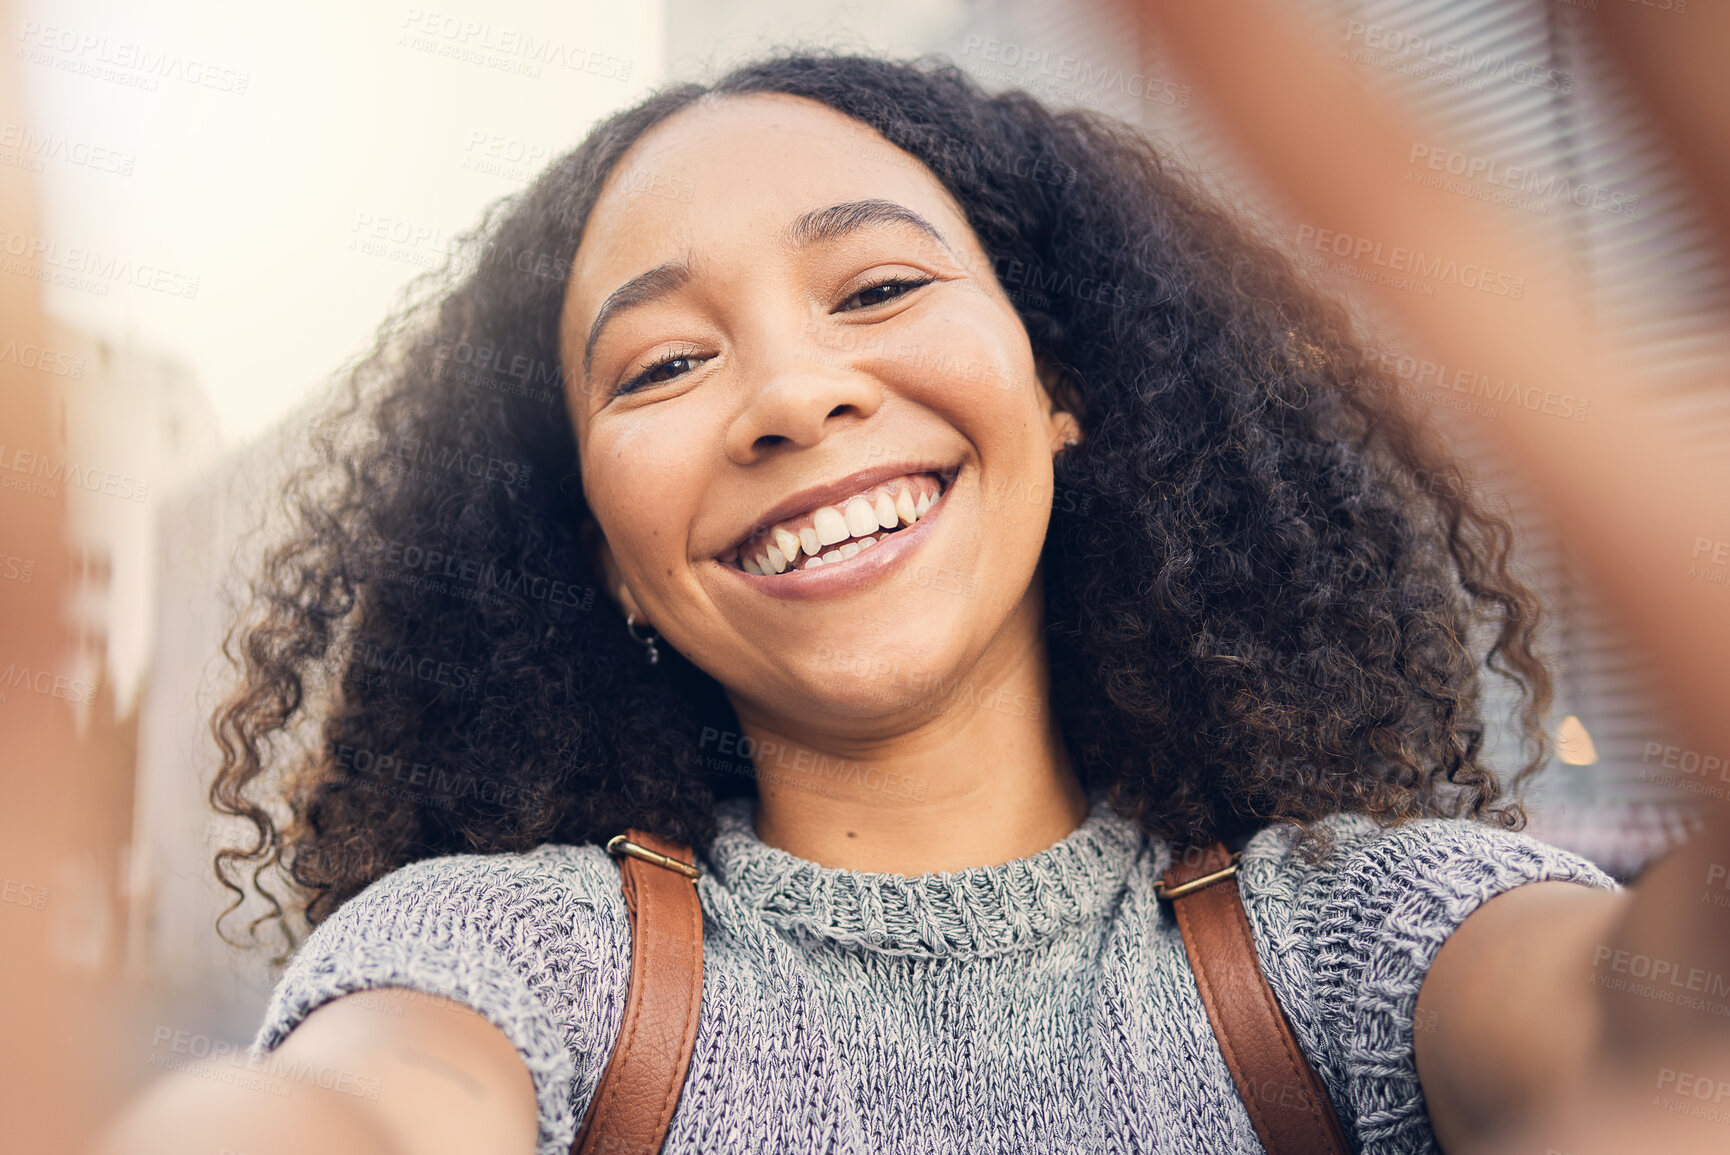 Buy stock photo Happy, selfie and portrait of a woman in the city for exploring or sightseeing on weekend trip. Social media, smile and face of African young female person from Mexico taking a picture in urban town.